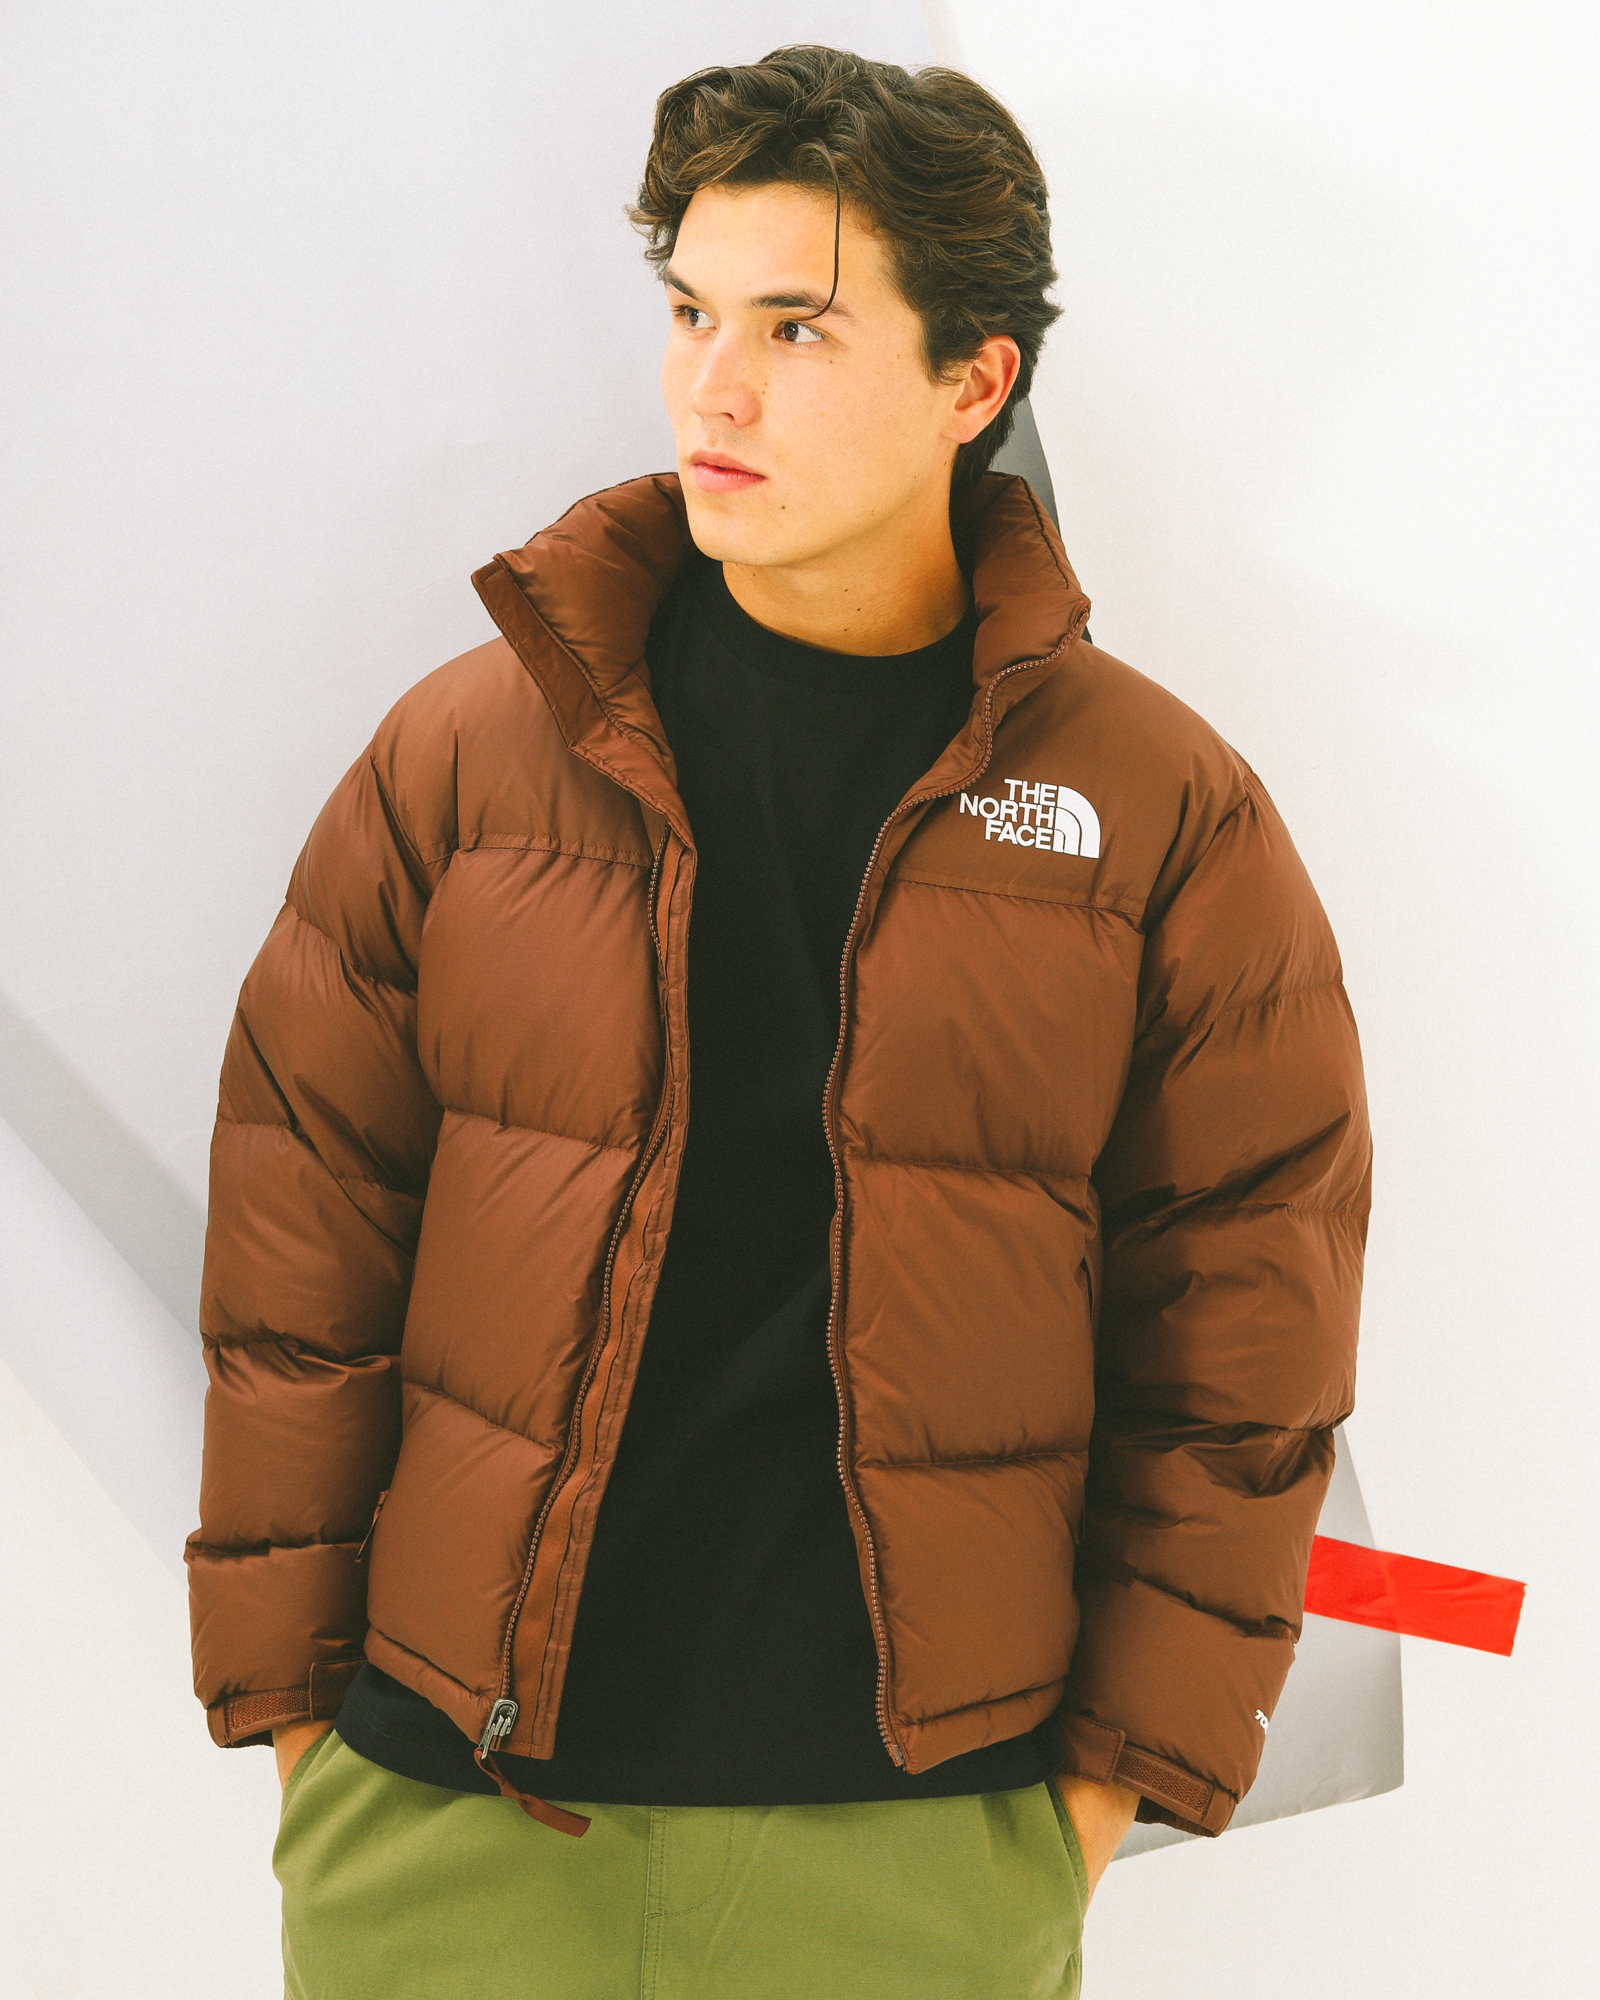 Iconic: The North Face puffers